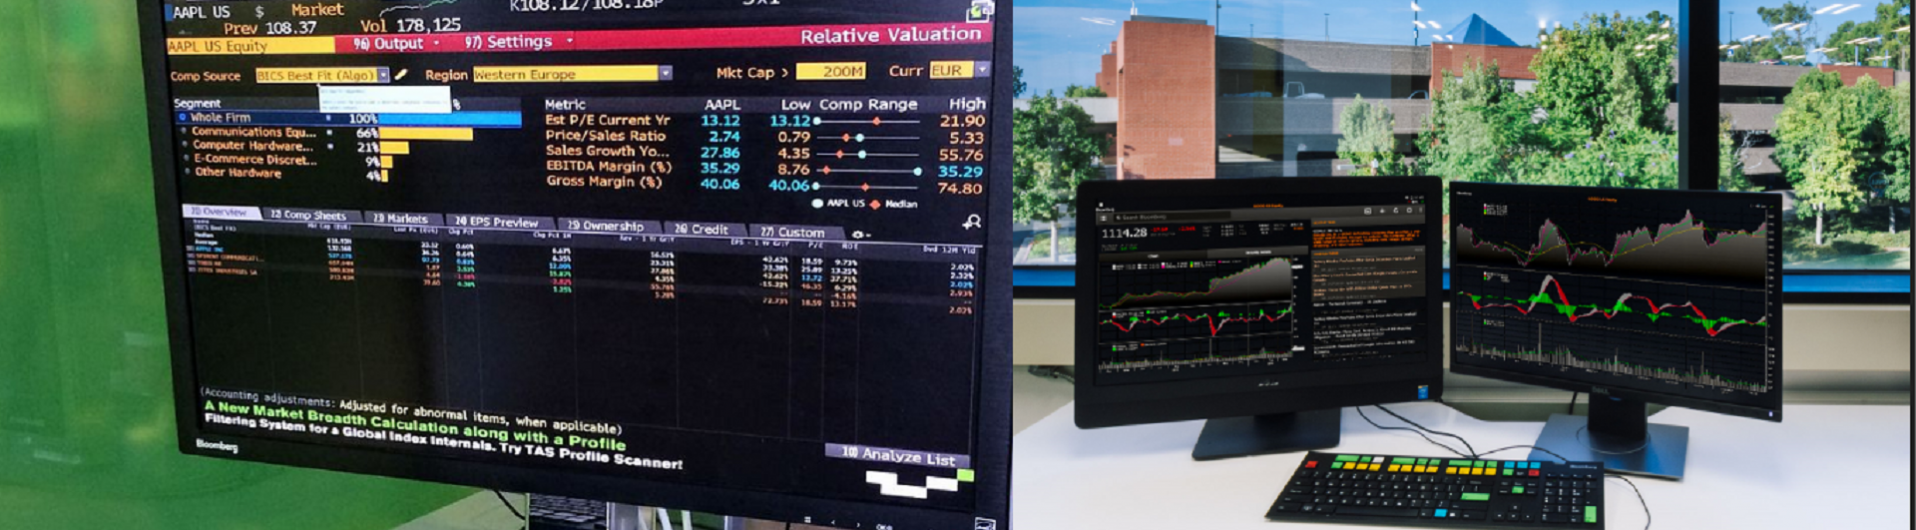 what is bloomberg terminal